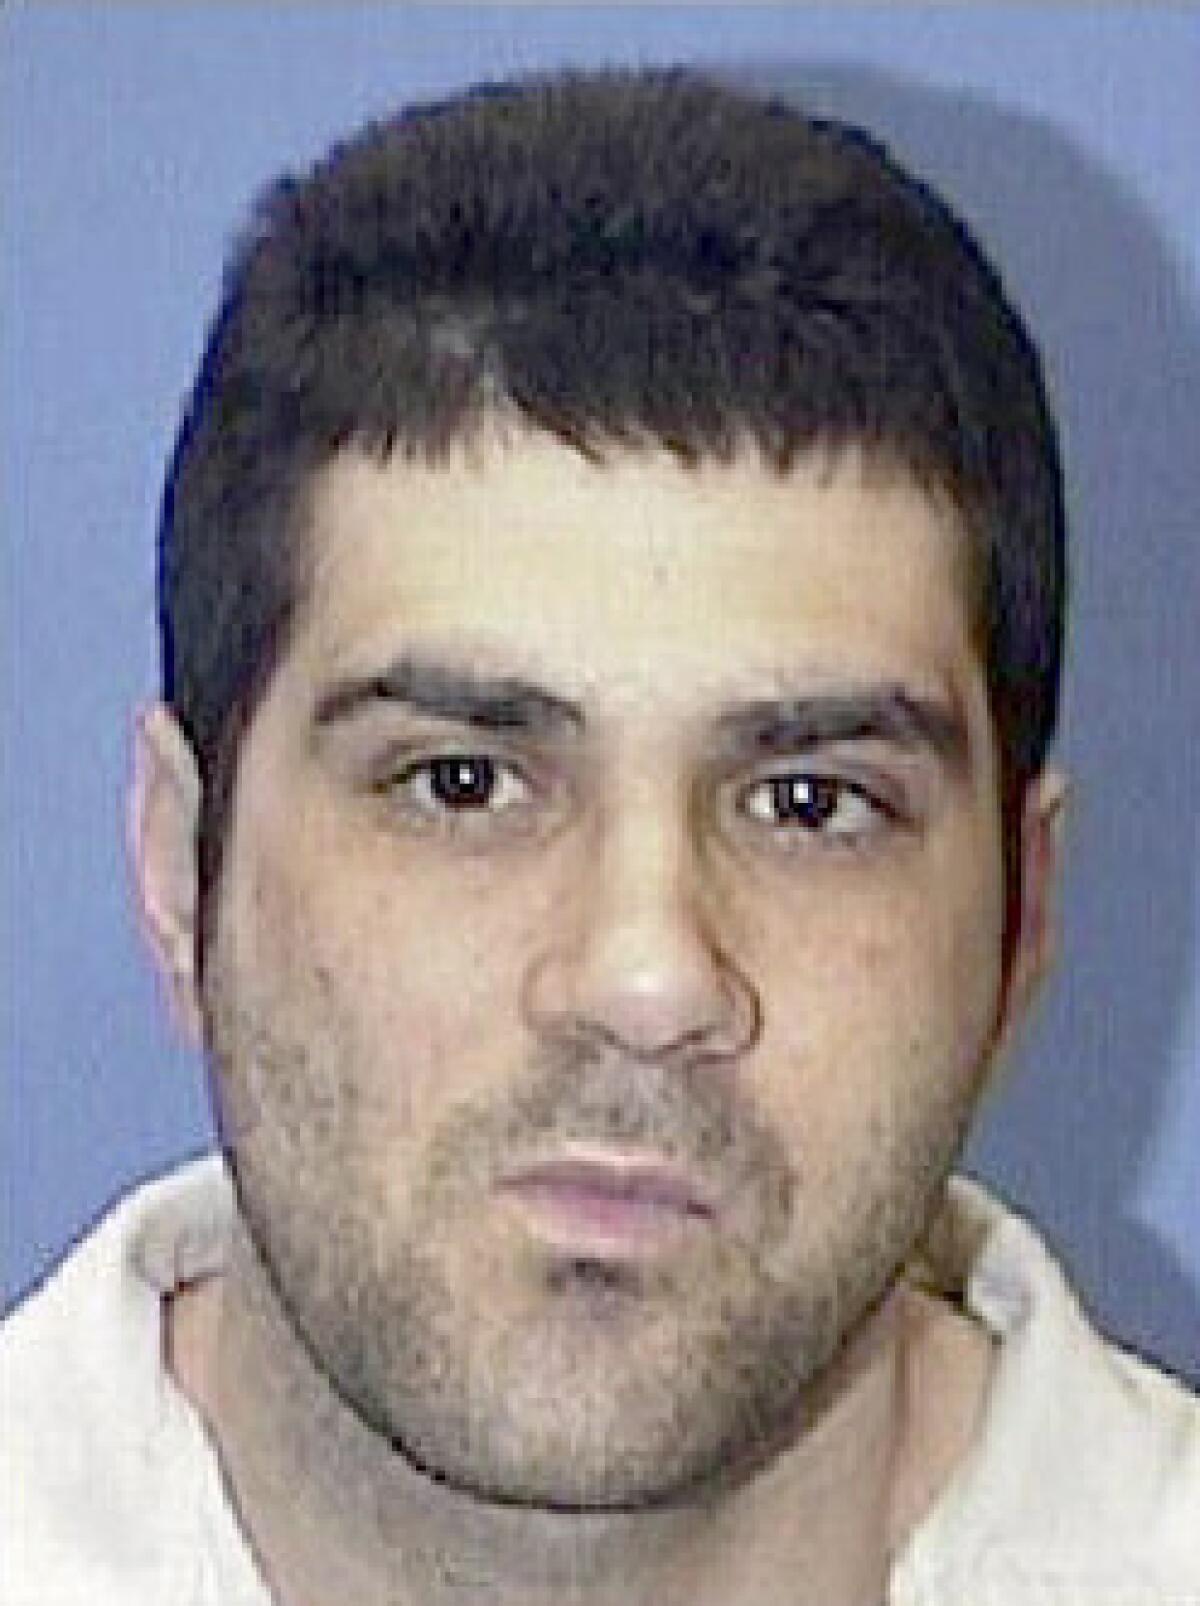 Texas executed Cameron Todd Willingham in 2004 for a fatal arson fire that he likely did not set. A newly surfaced prosecutor file suggests evidence was hidden of a deal between prosecutors and a key jailhouse witness.